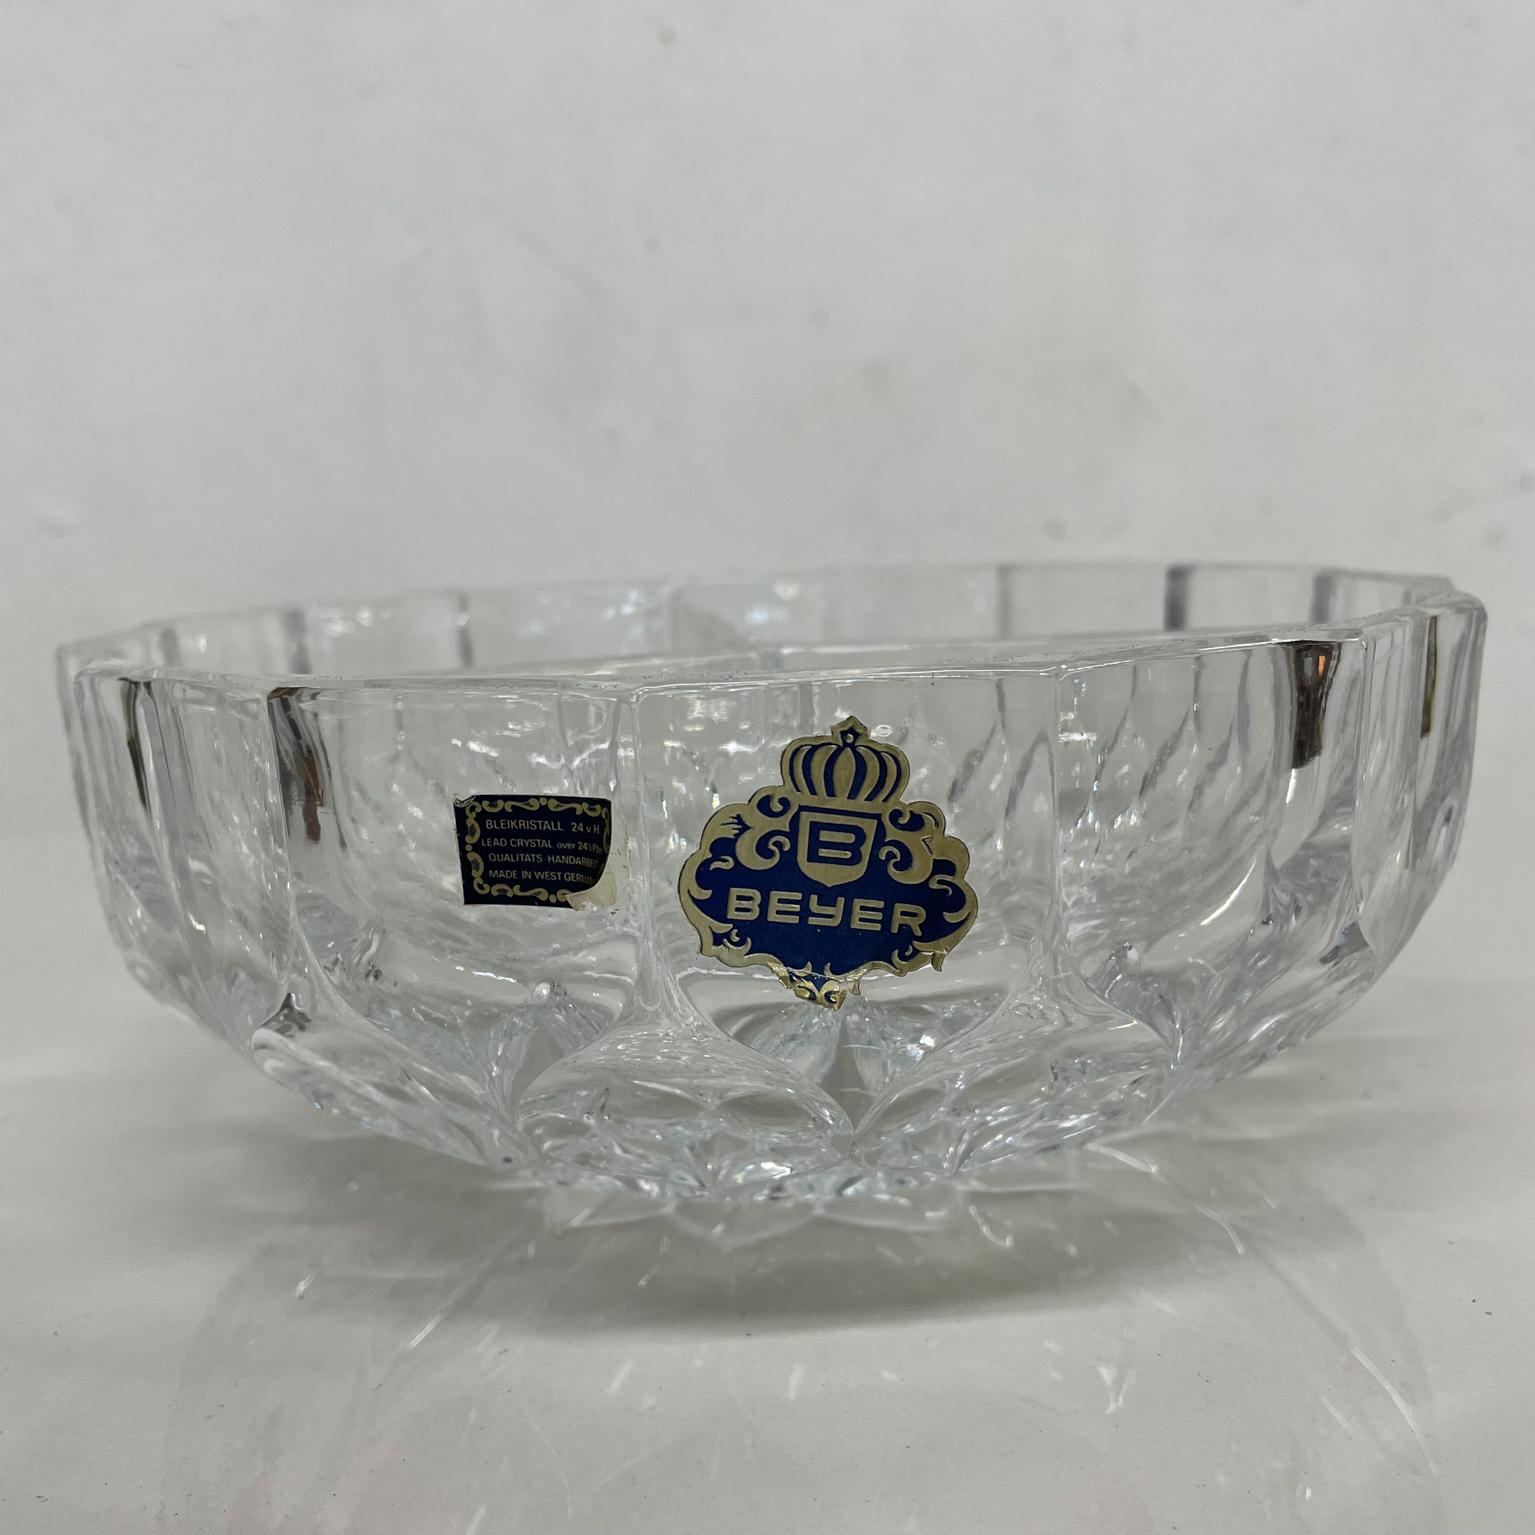 Crystal Dish
Beyer Bleikristall from Germany crystal sectioned bowl serving dish 
Measures: 8.13 x 3 H inches
Preowned unrestored vintage condition, refer to images.
Maker label is present.

